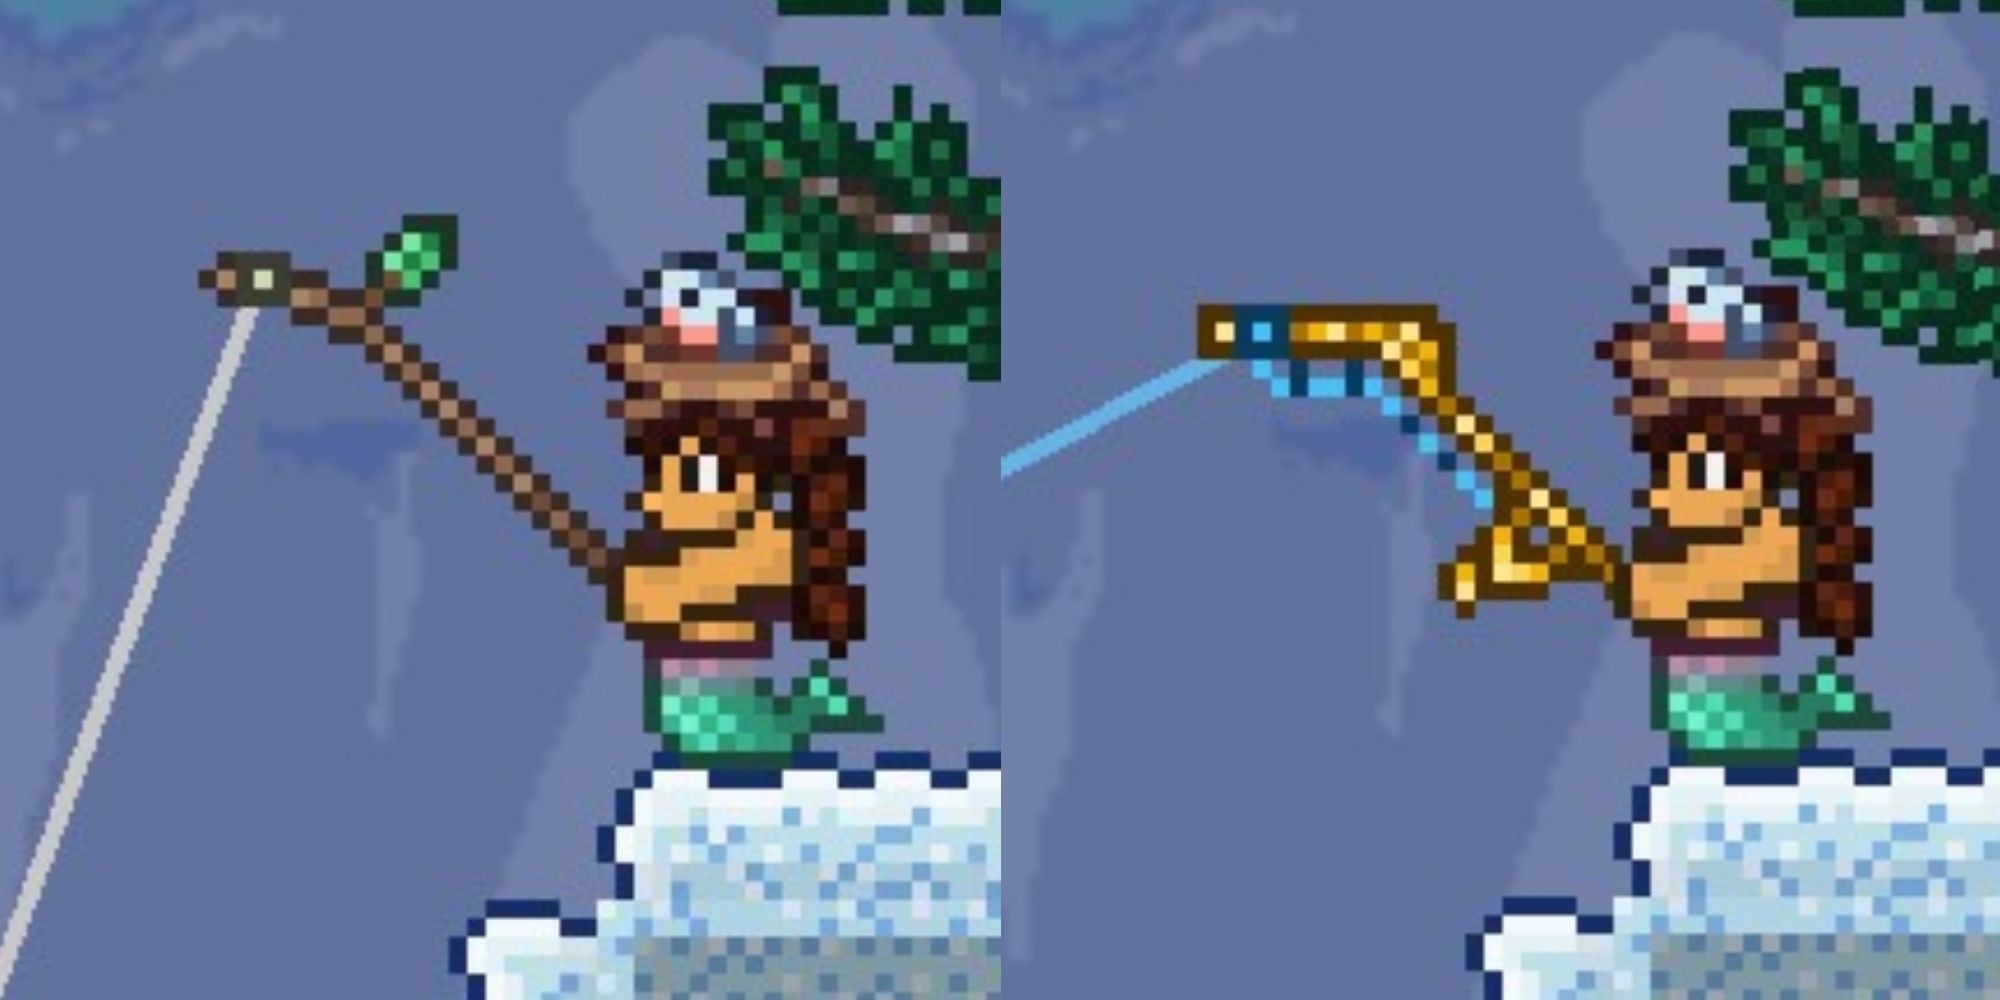 How To Get A Fishing Pole In Terraria